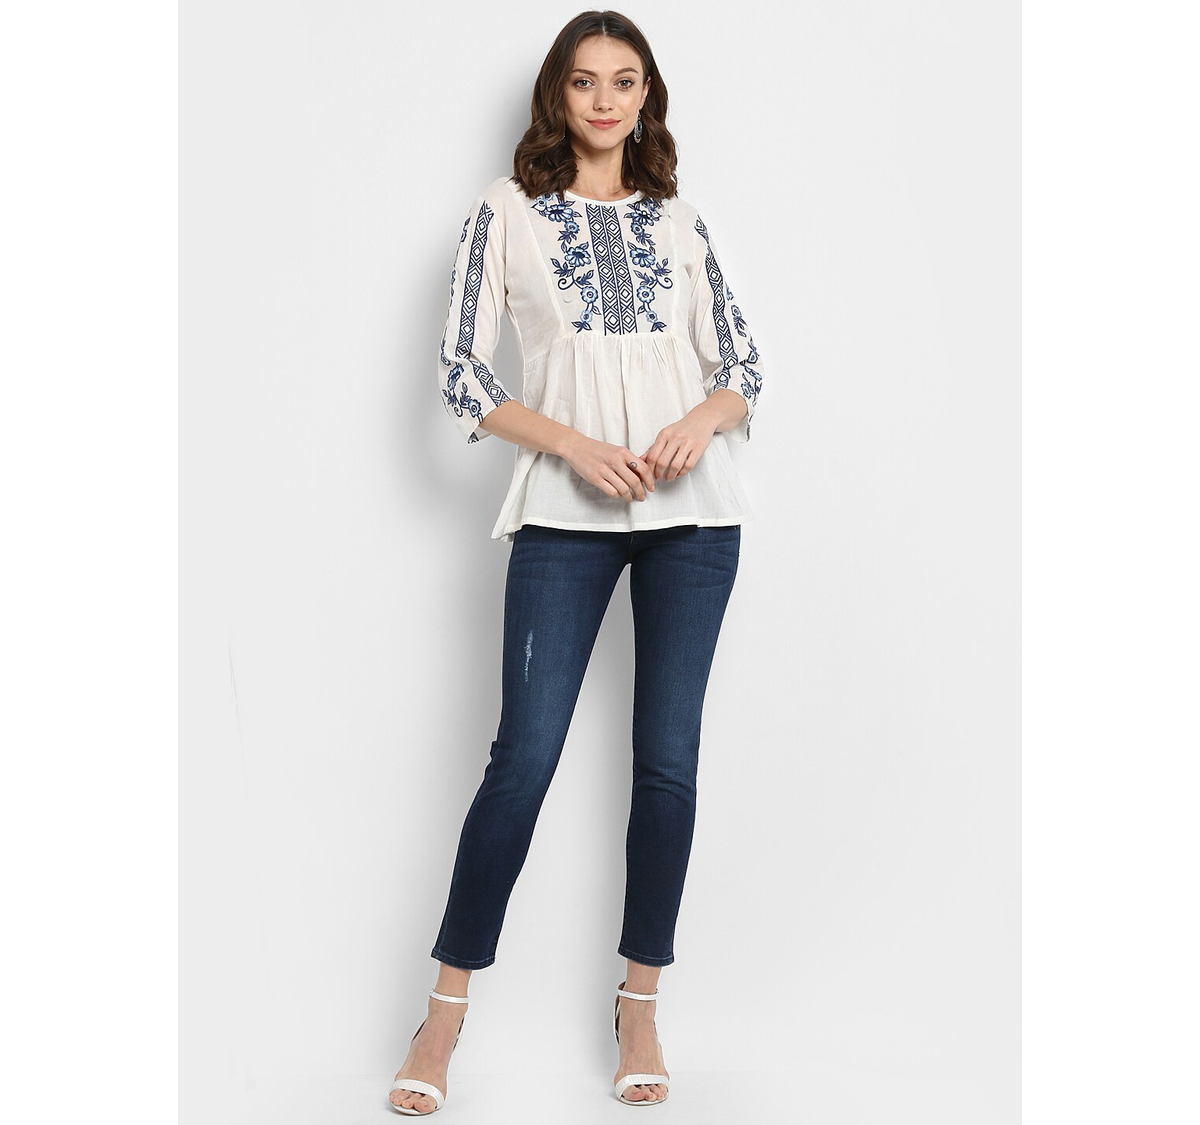 Women's Off White Embellished A-Line Top2 - Wahe-NOOR